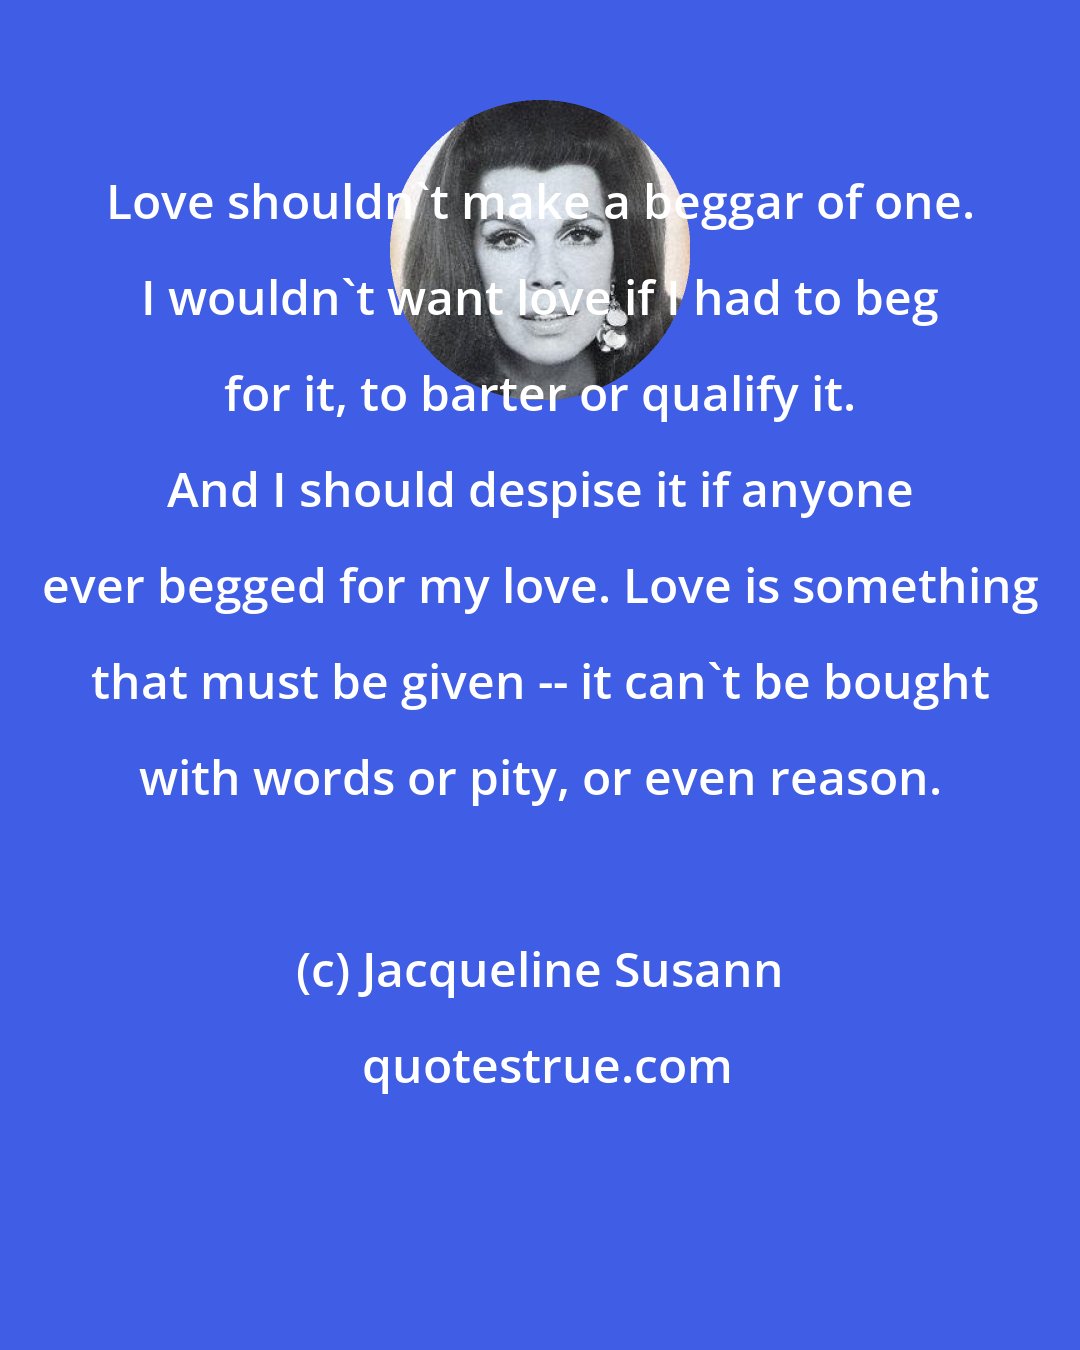 Jacqueline Susann: Love shouldn't make a beggar of one. I wouldn't want love if I had to beg for it, to barter or qualify it. And I should despise it if anyone ever begged for my love. Love is something that must be given -- it can't be bought with words or pity, or even reason.